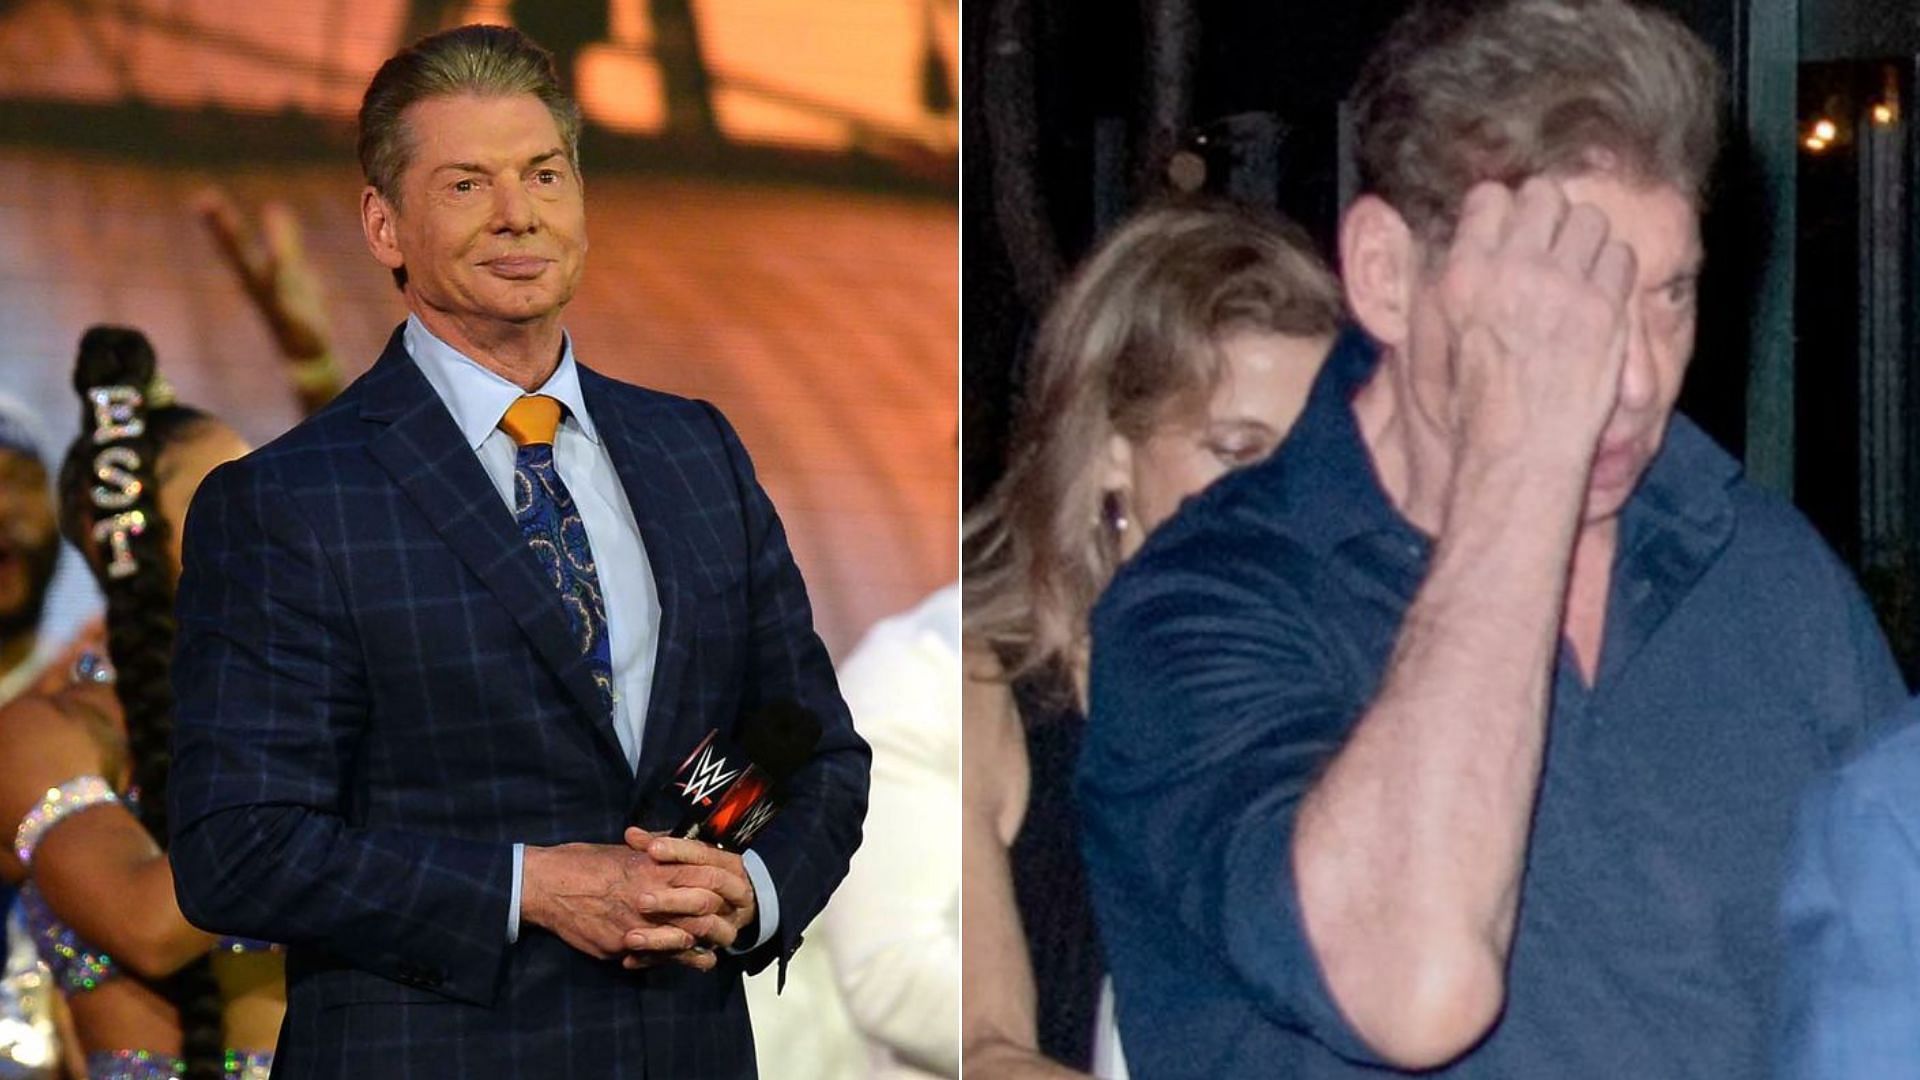 Vince McMahon recently celebrated his 77th birthday